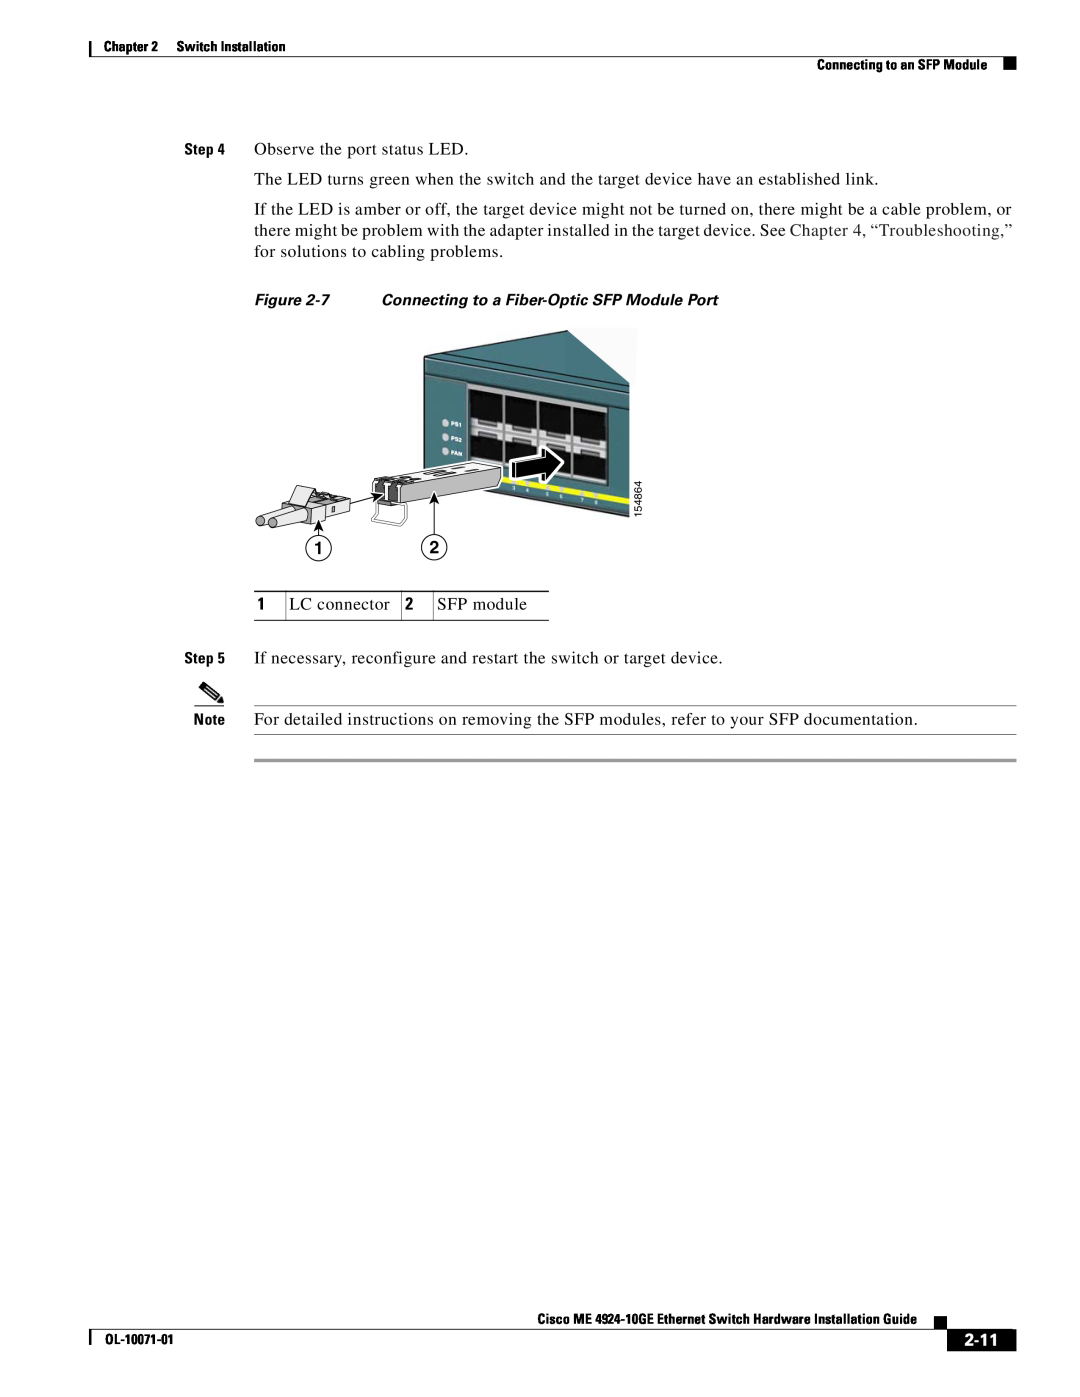 Cisco Systems ME 4924-10GE manual 2-11, 7 Connecting to a Fiber-Optic SFP Module Port 